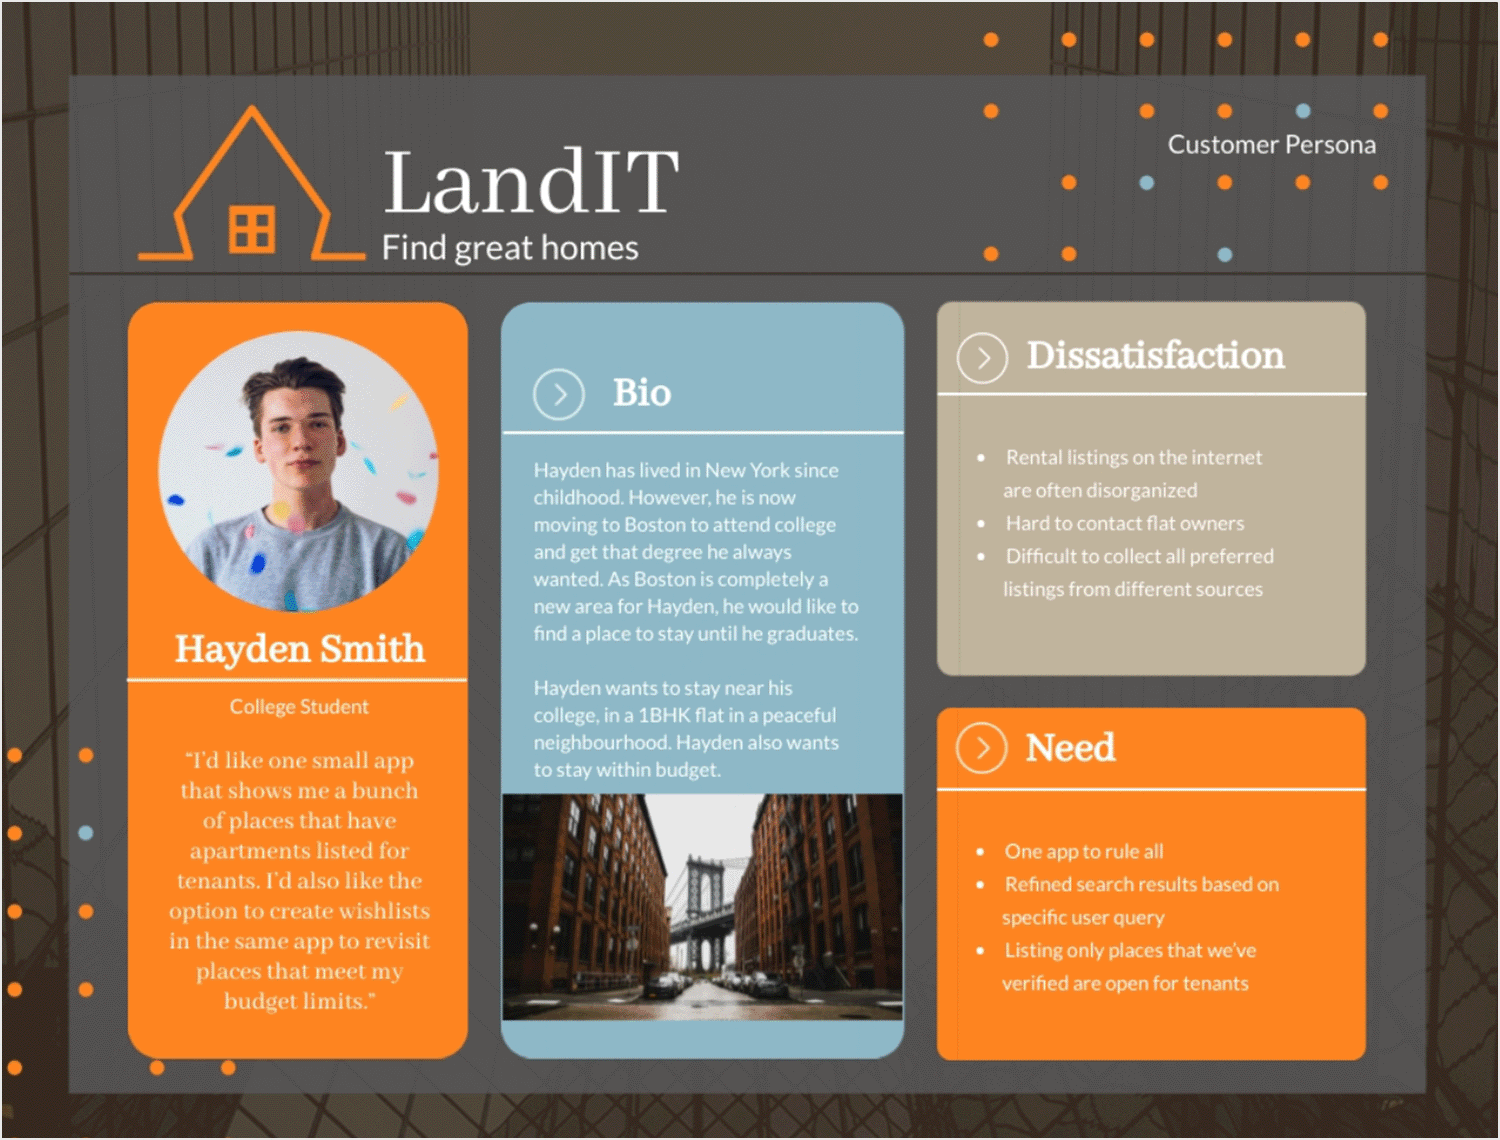 Hayden Smith's user persona showcases his need for a simple, efficient app to find and manage apartment listings.